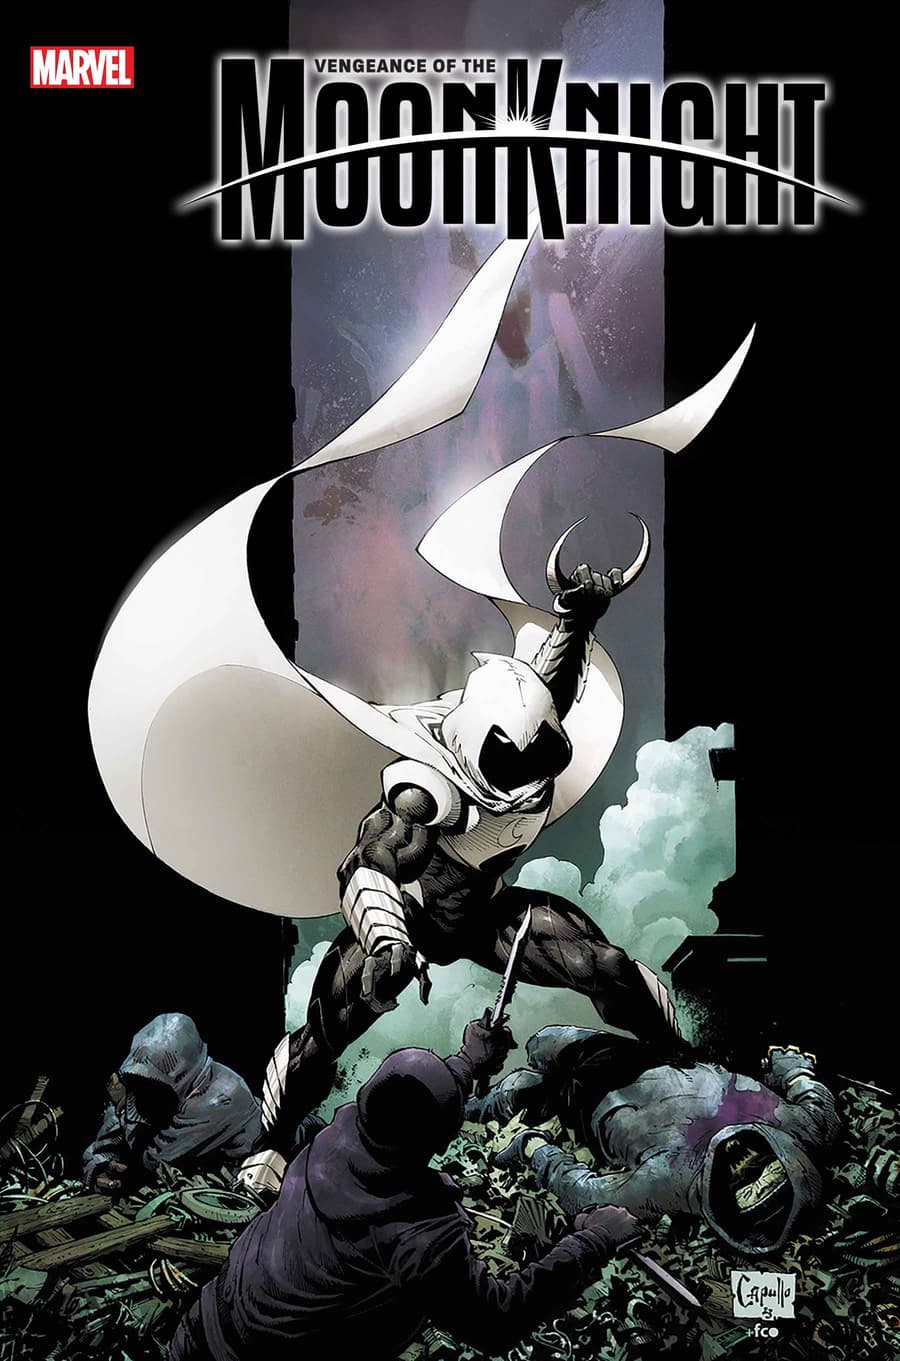 Variant cover to VENGEANCE OF THE MOON KNIGHT (2023) #1 by Greg Capullo.